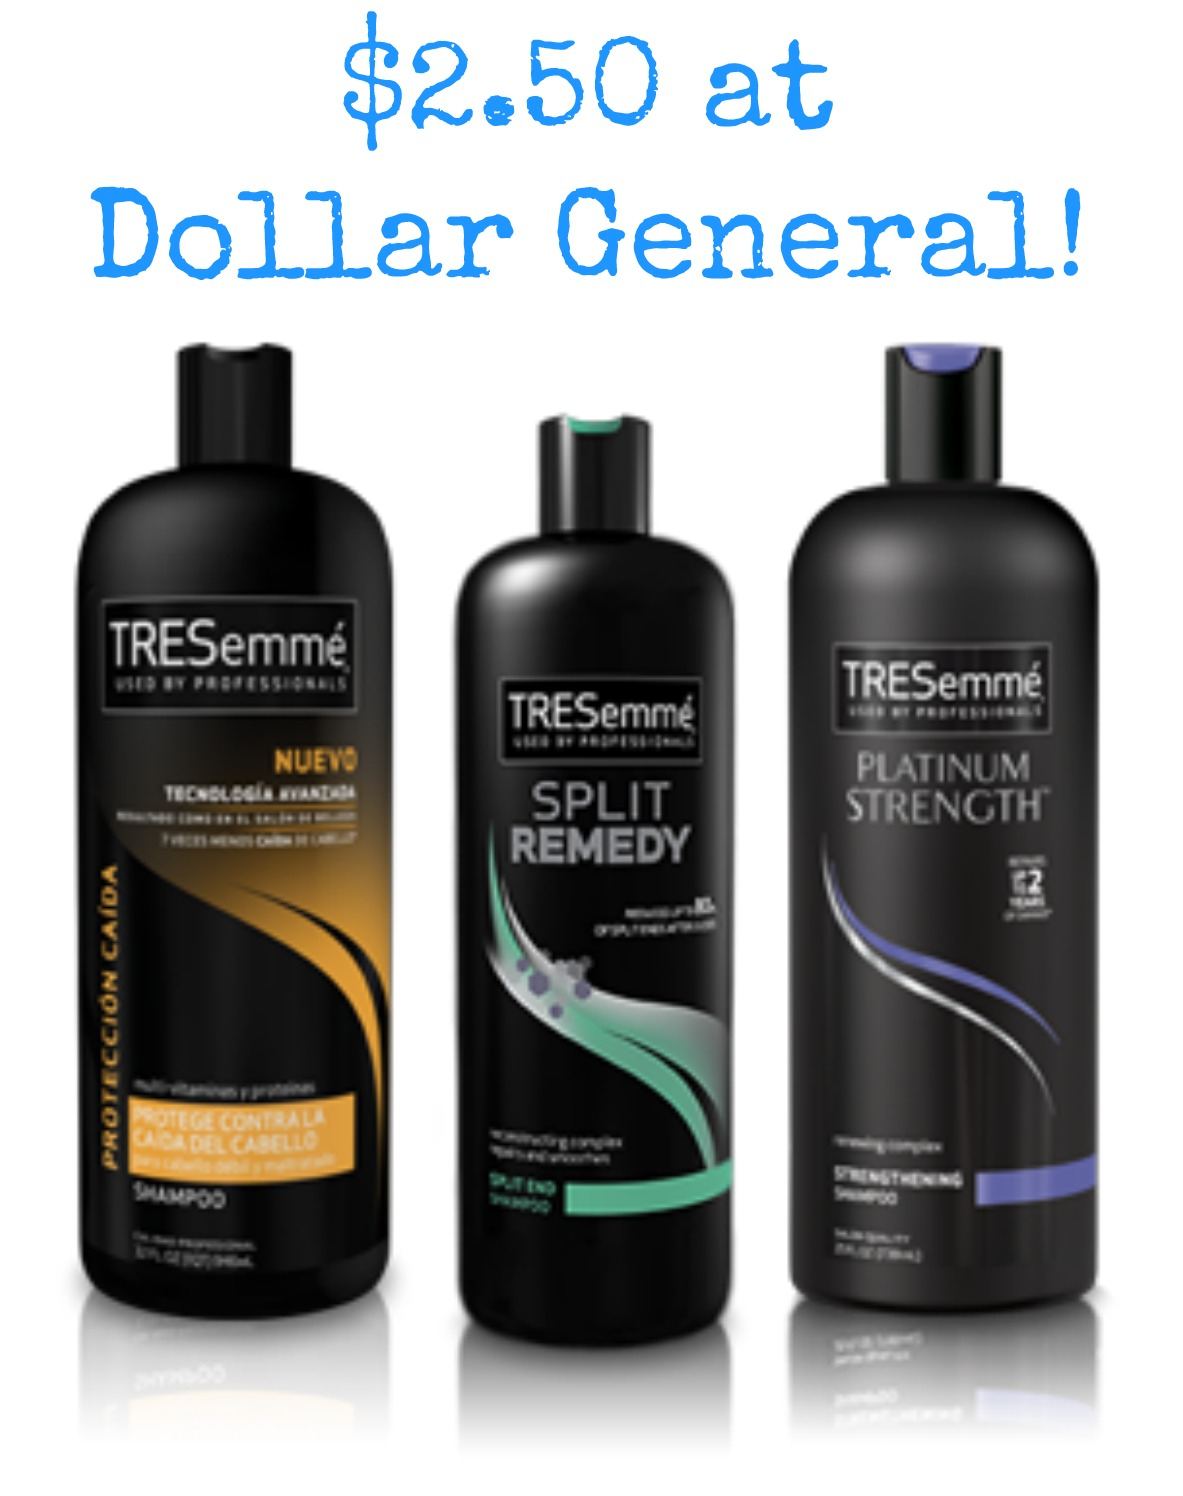 Printable Coupons For Tresemme Hair Products : Shrimp Coupons - Free Printable Tresemme Coupons